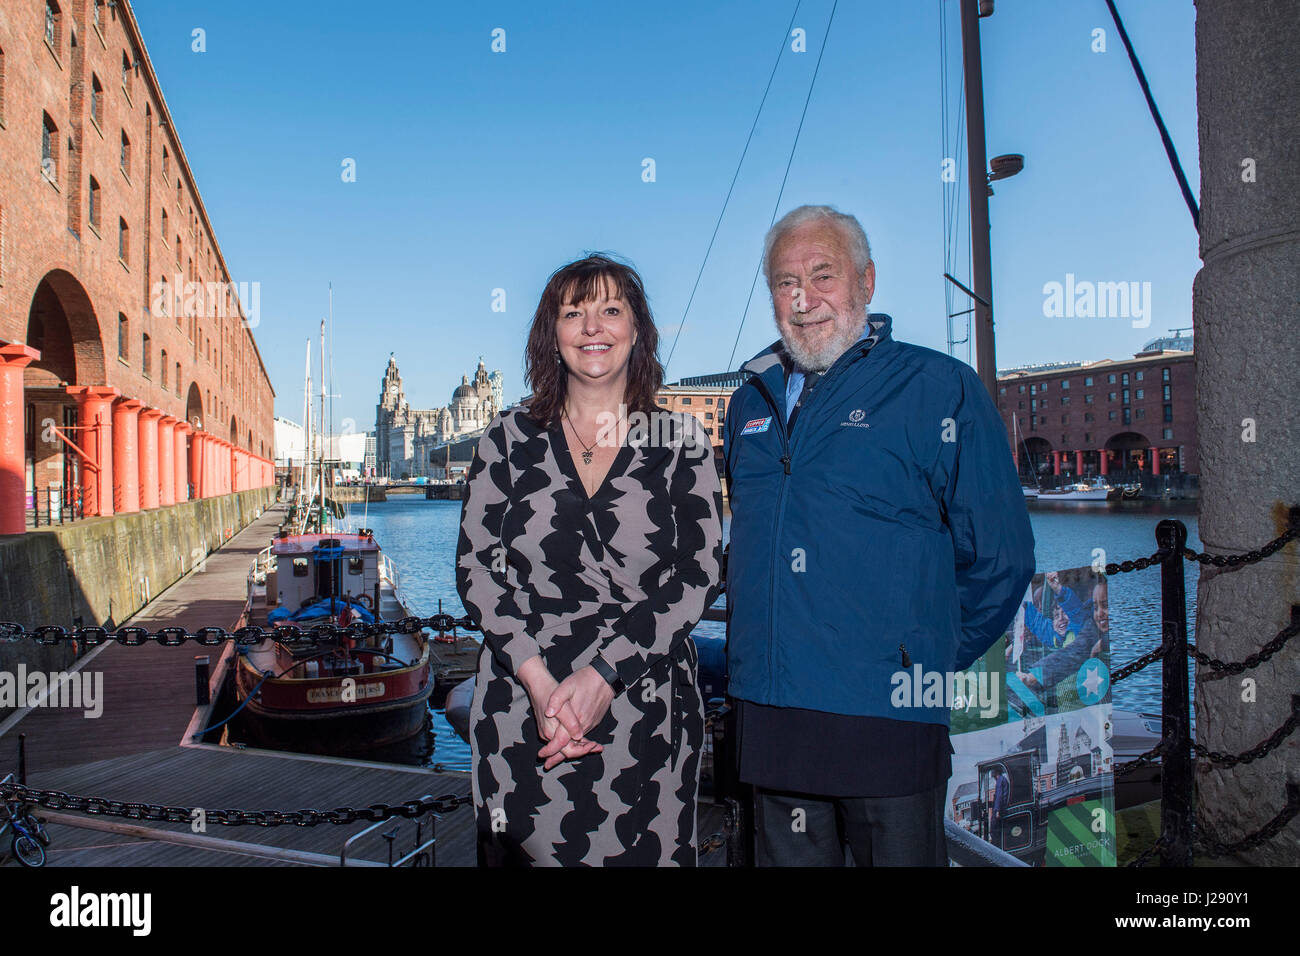 Sir Robin Knox-Johnston, founder of the Clipper Race, (right) and deputy Mayor of Liverpool Ann O'Byrne pose in Albert Dock as they announce the return of the Clipper Round The World Yacht Race to Liverpool. Stock Photo